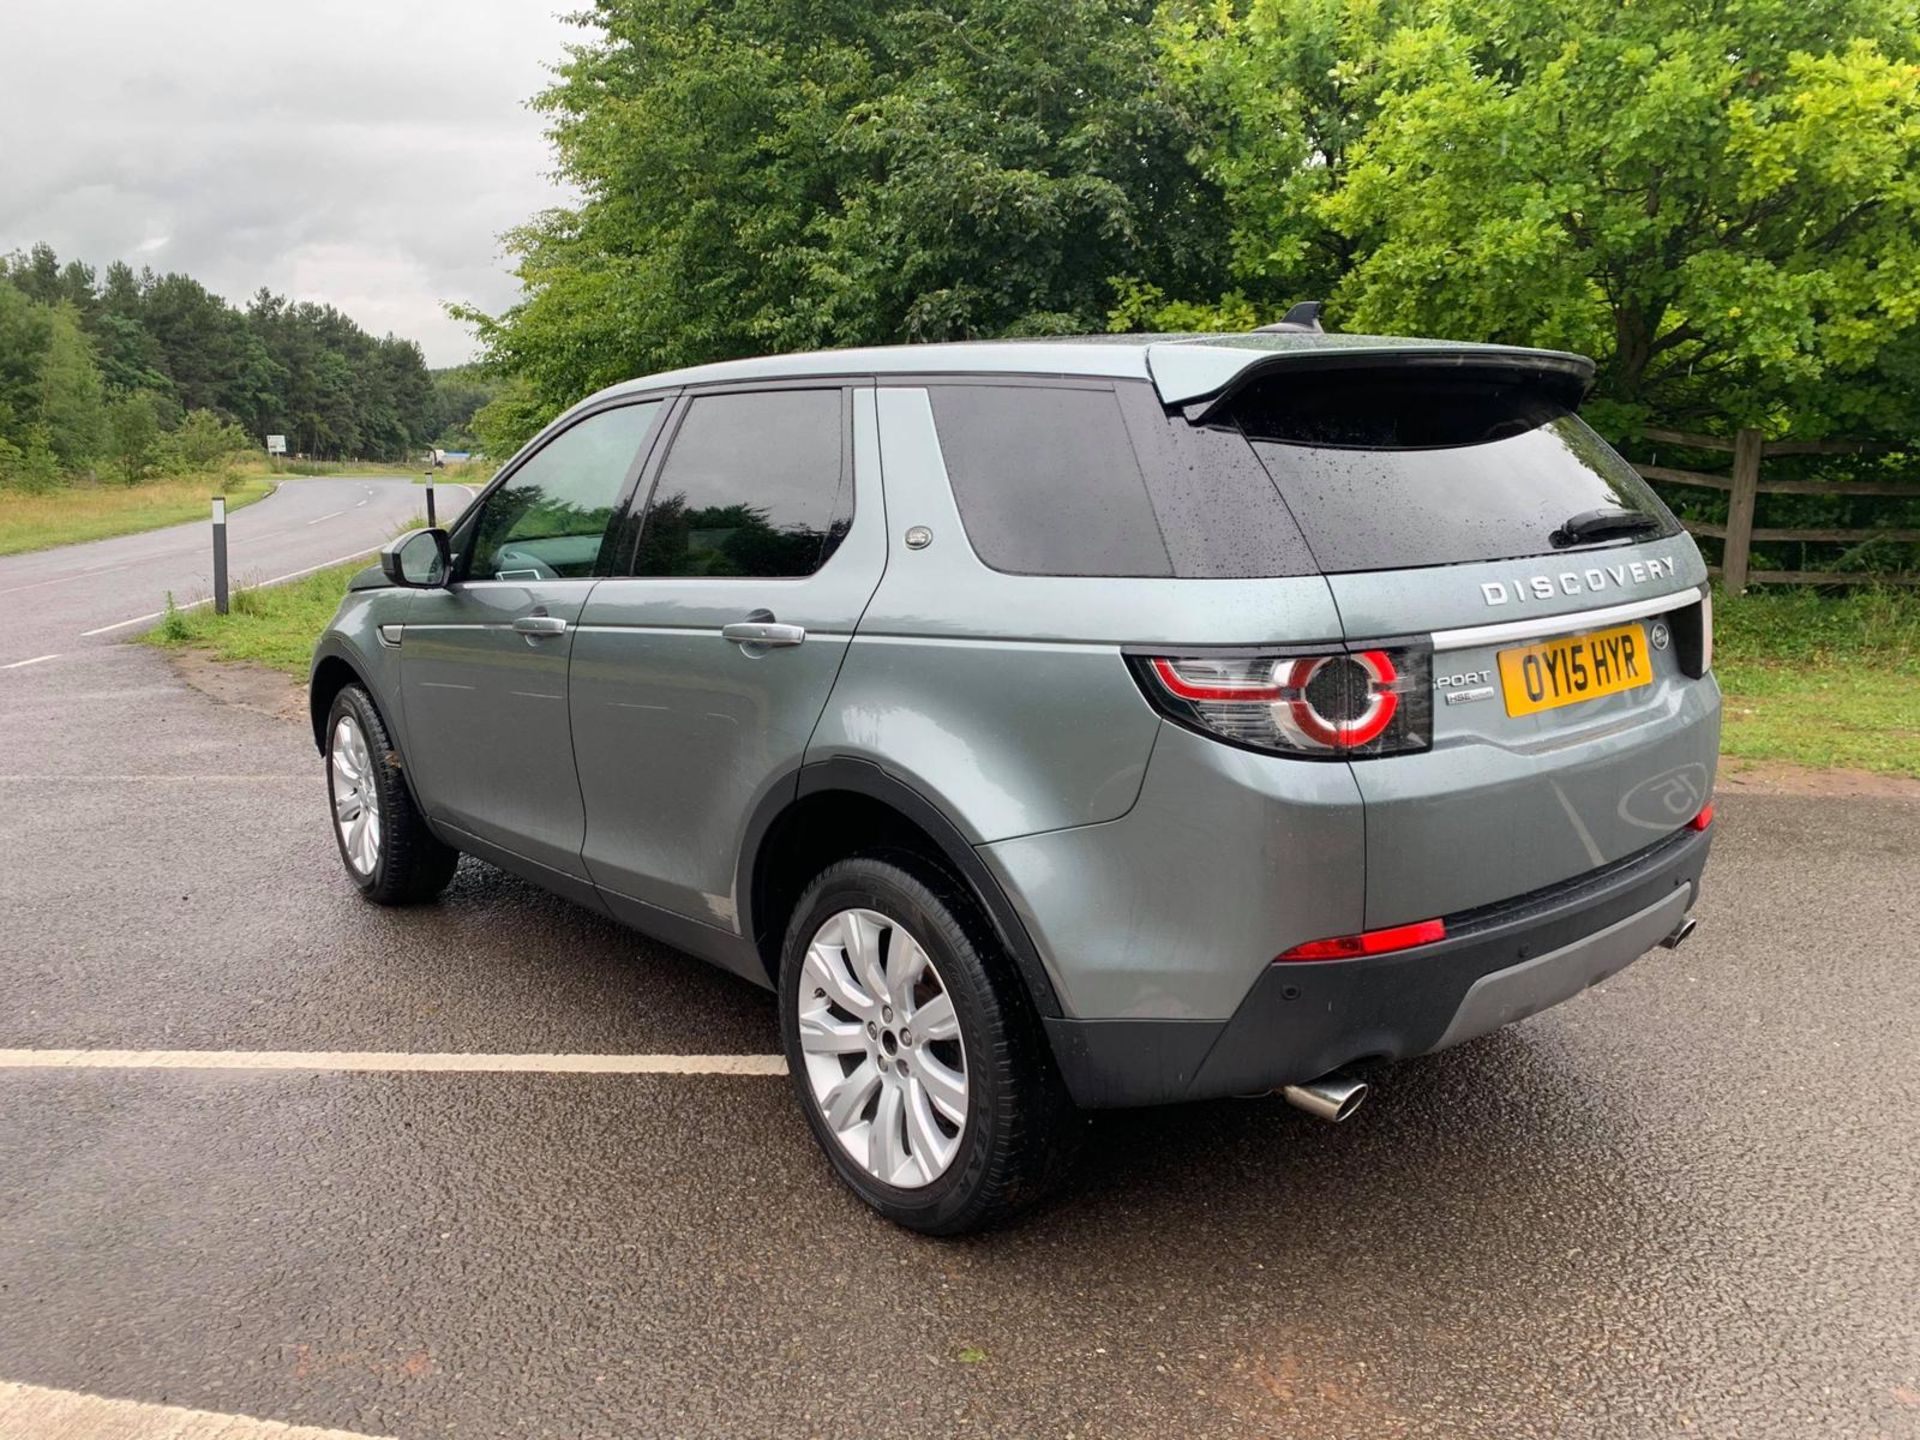 2015/15 REG LAND ROVER DISCOVERY SPORT SD4 HSE LUXURY 2.2 DIESEL AUTOMATIC, SHOWING 2 FORMER KEEPERS - Image 5 of 17